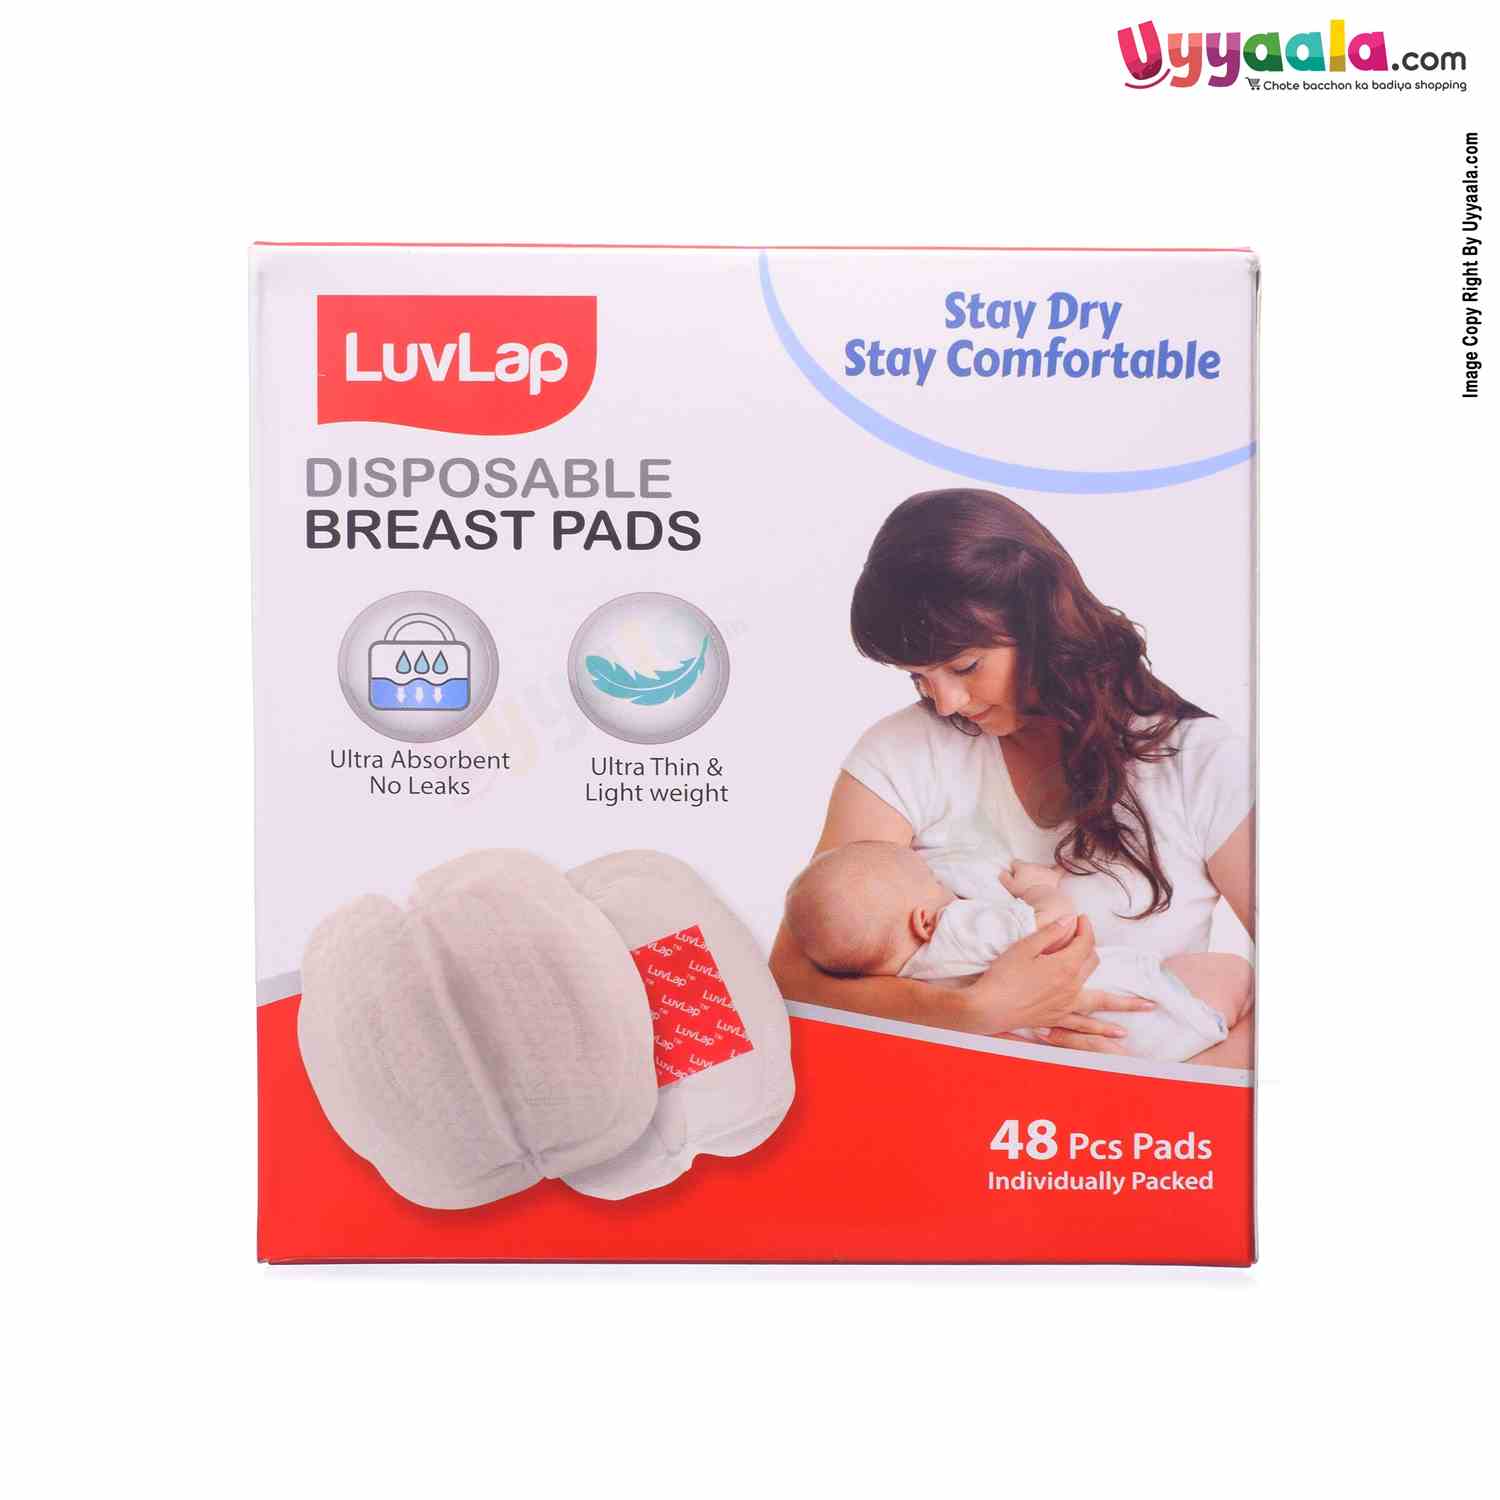 Maternity Products Online in India